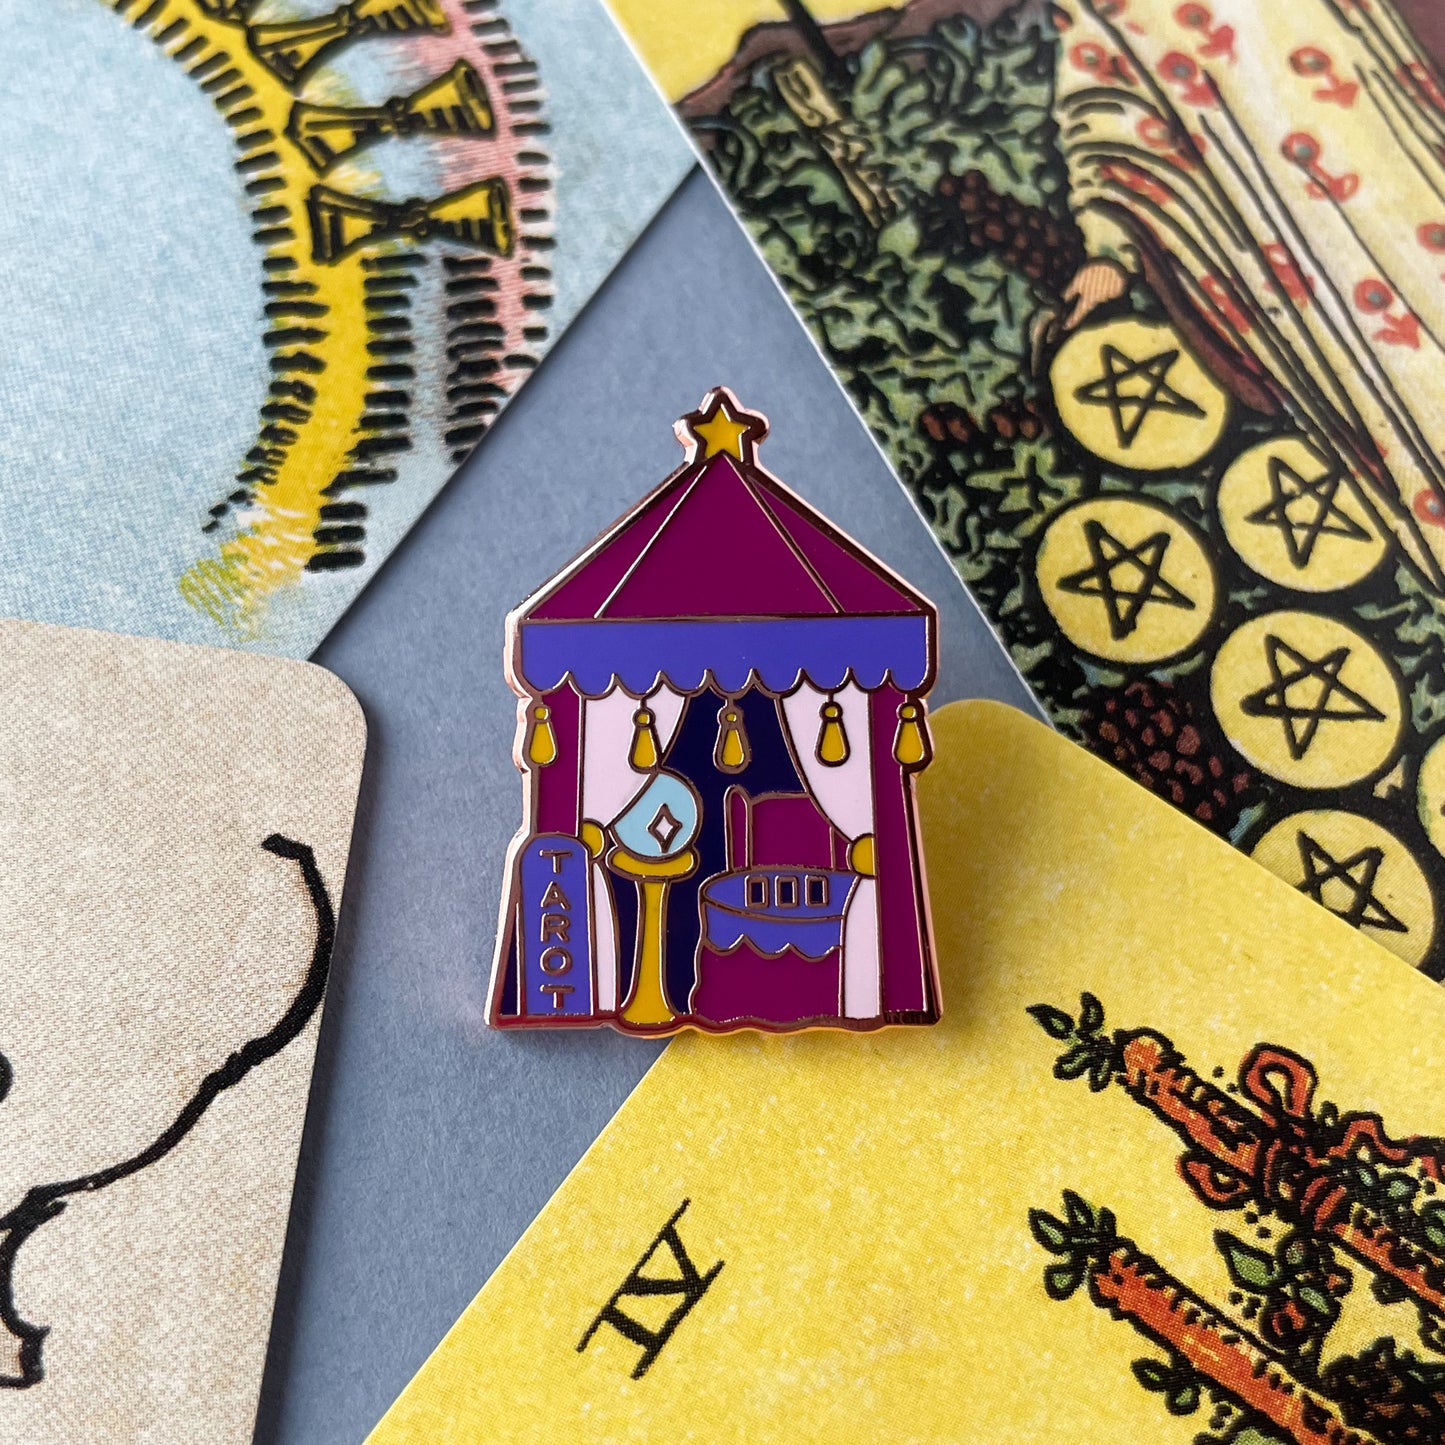 A tent shaped pin surrounded by cards from the Smith-Waite tarot deck.